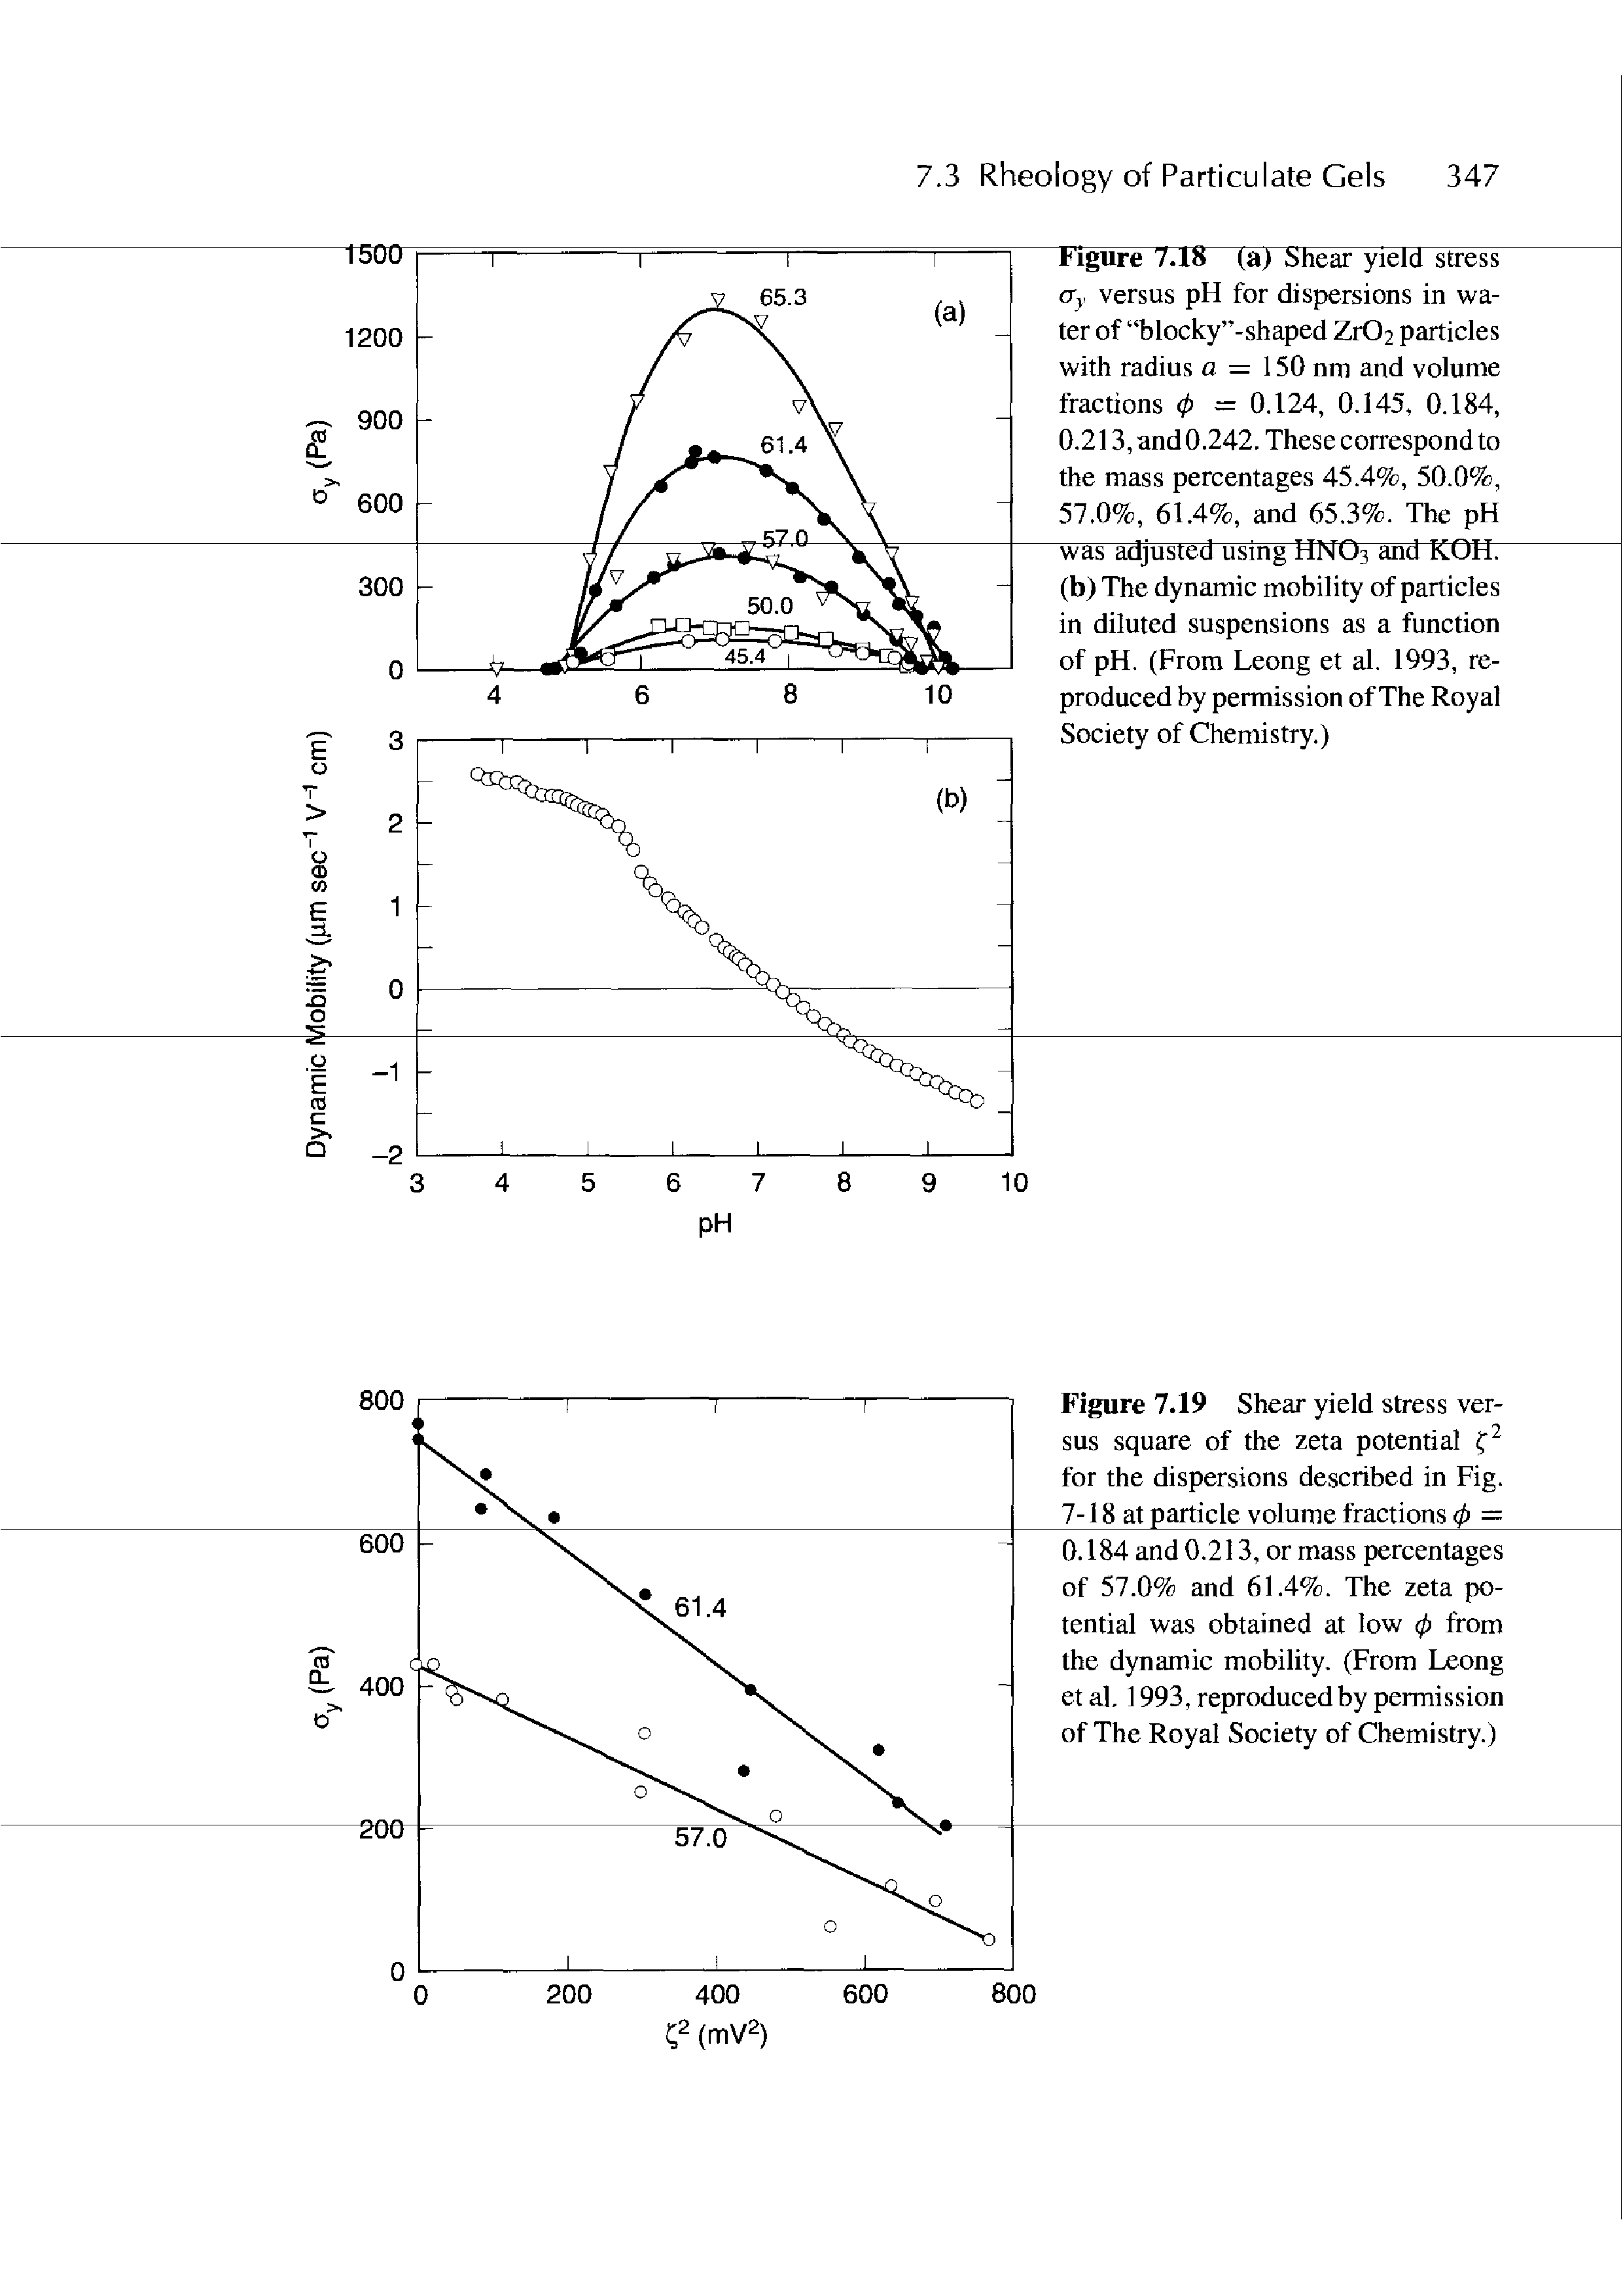 Figure 7.19 Shear yield stress versus square of the zeta potential for the dispersions described in Fig. 7-18 at particle volume fractions (p = 0.184 and 0.213, or mass percentages of 57.0% and 61.4%. The zeta potential was obtained at low (p from the dynamic mobility. (From Leong et al. 1993, reproduced by permission of The Royal Society of Chemistry.)...